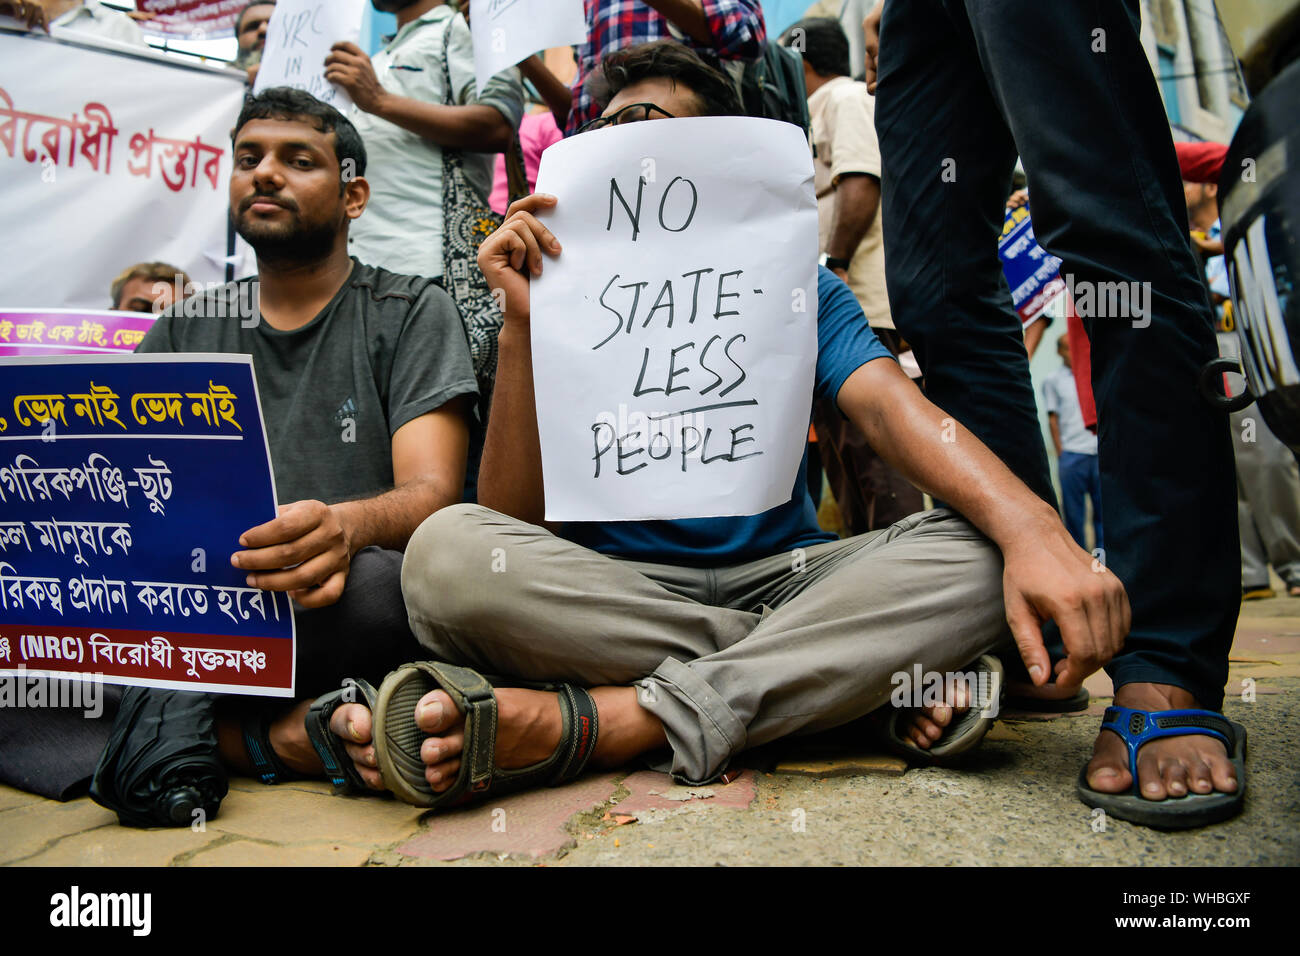 A protester holds a placard that says no stateless people during a protest against National Register of Citizens (NRC) in kolkata.The National Register of Citizens (NRC), is the list of Indian citizens in Assam which is being updated to weed out illegal immigration from Bangladesh and neighbouring regions. Stock Photo